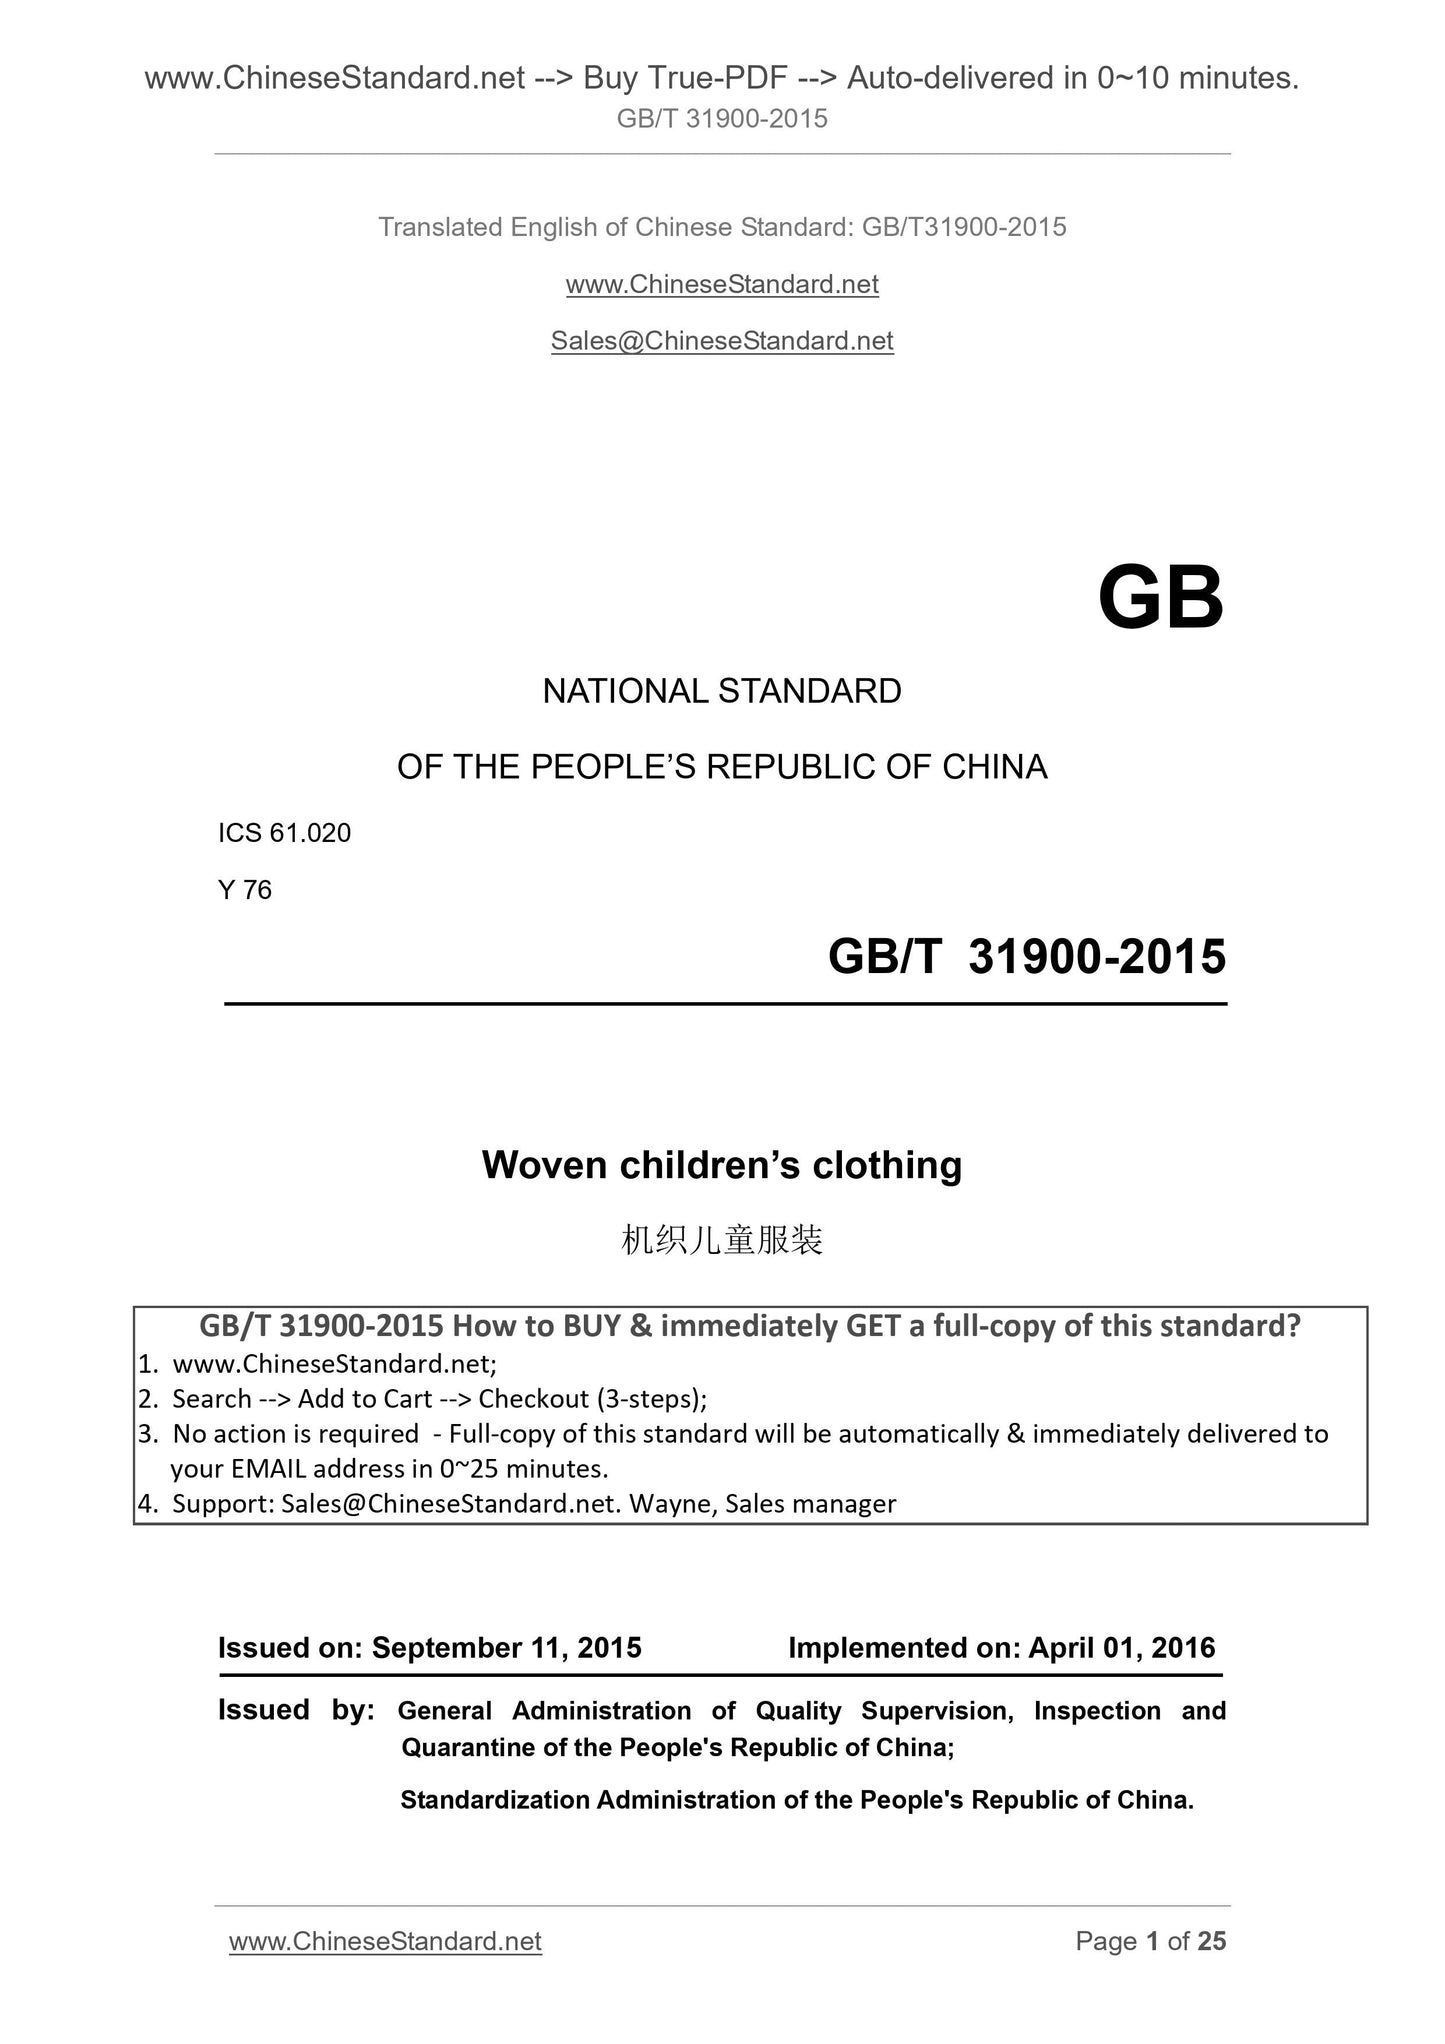 GB/T 31900-2015 Page 1